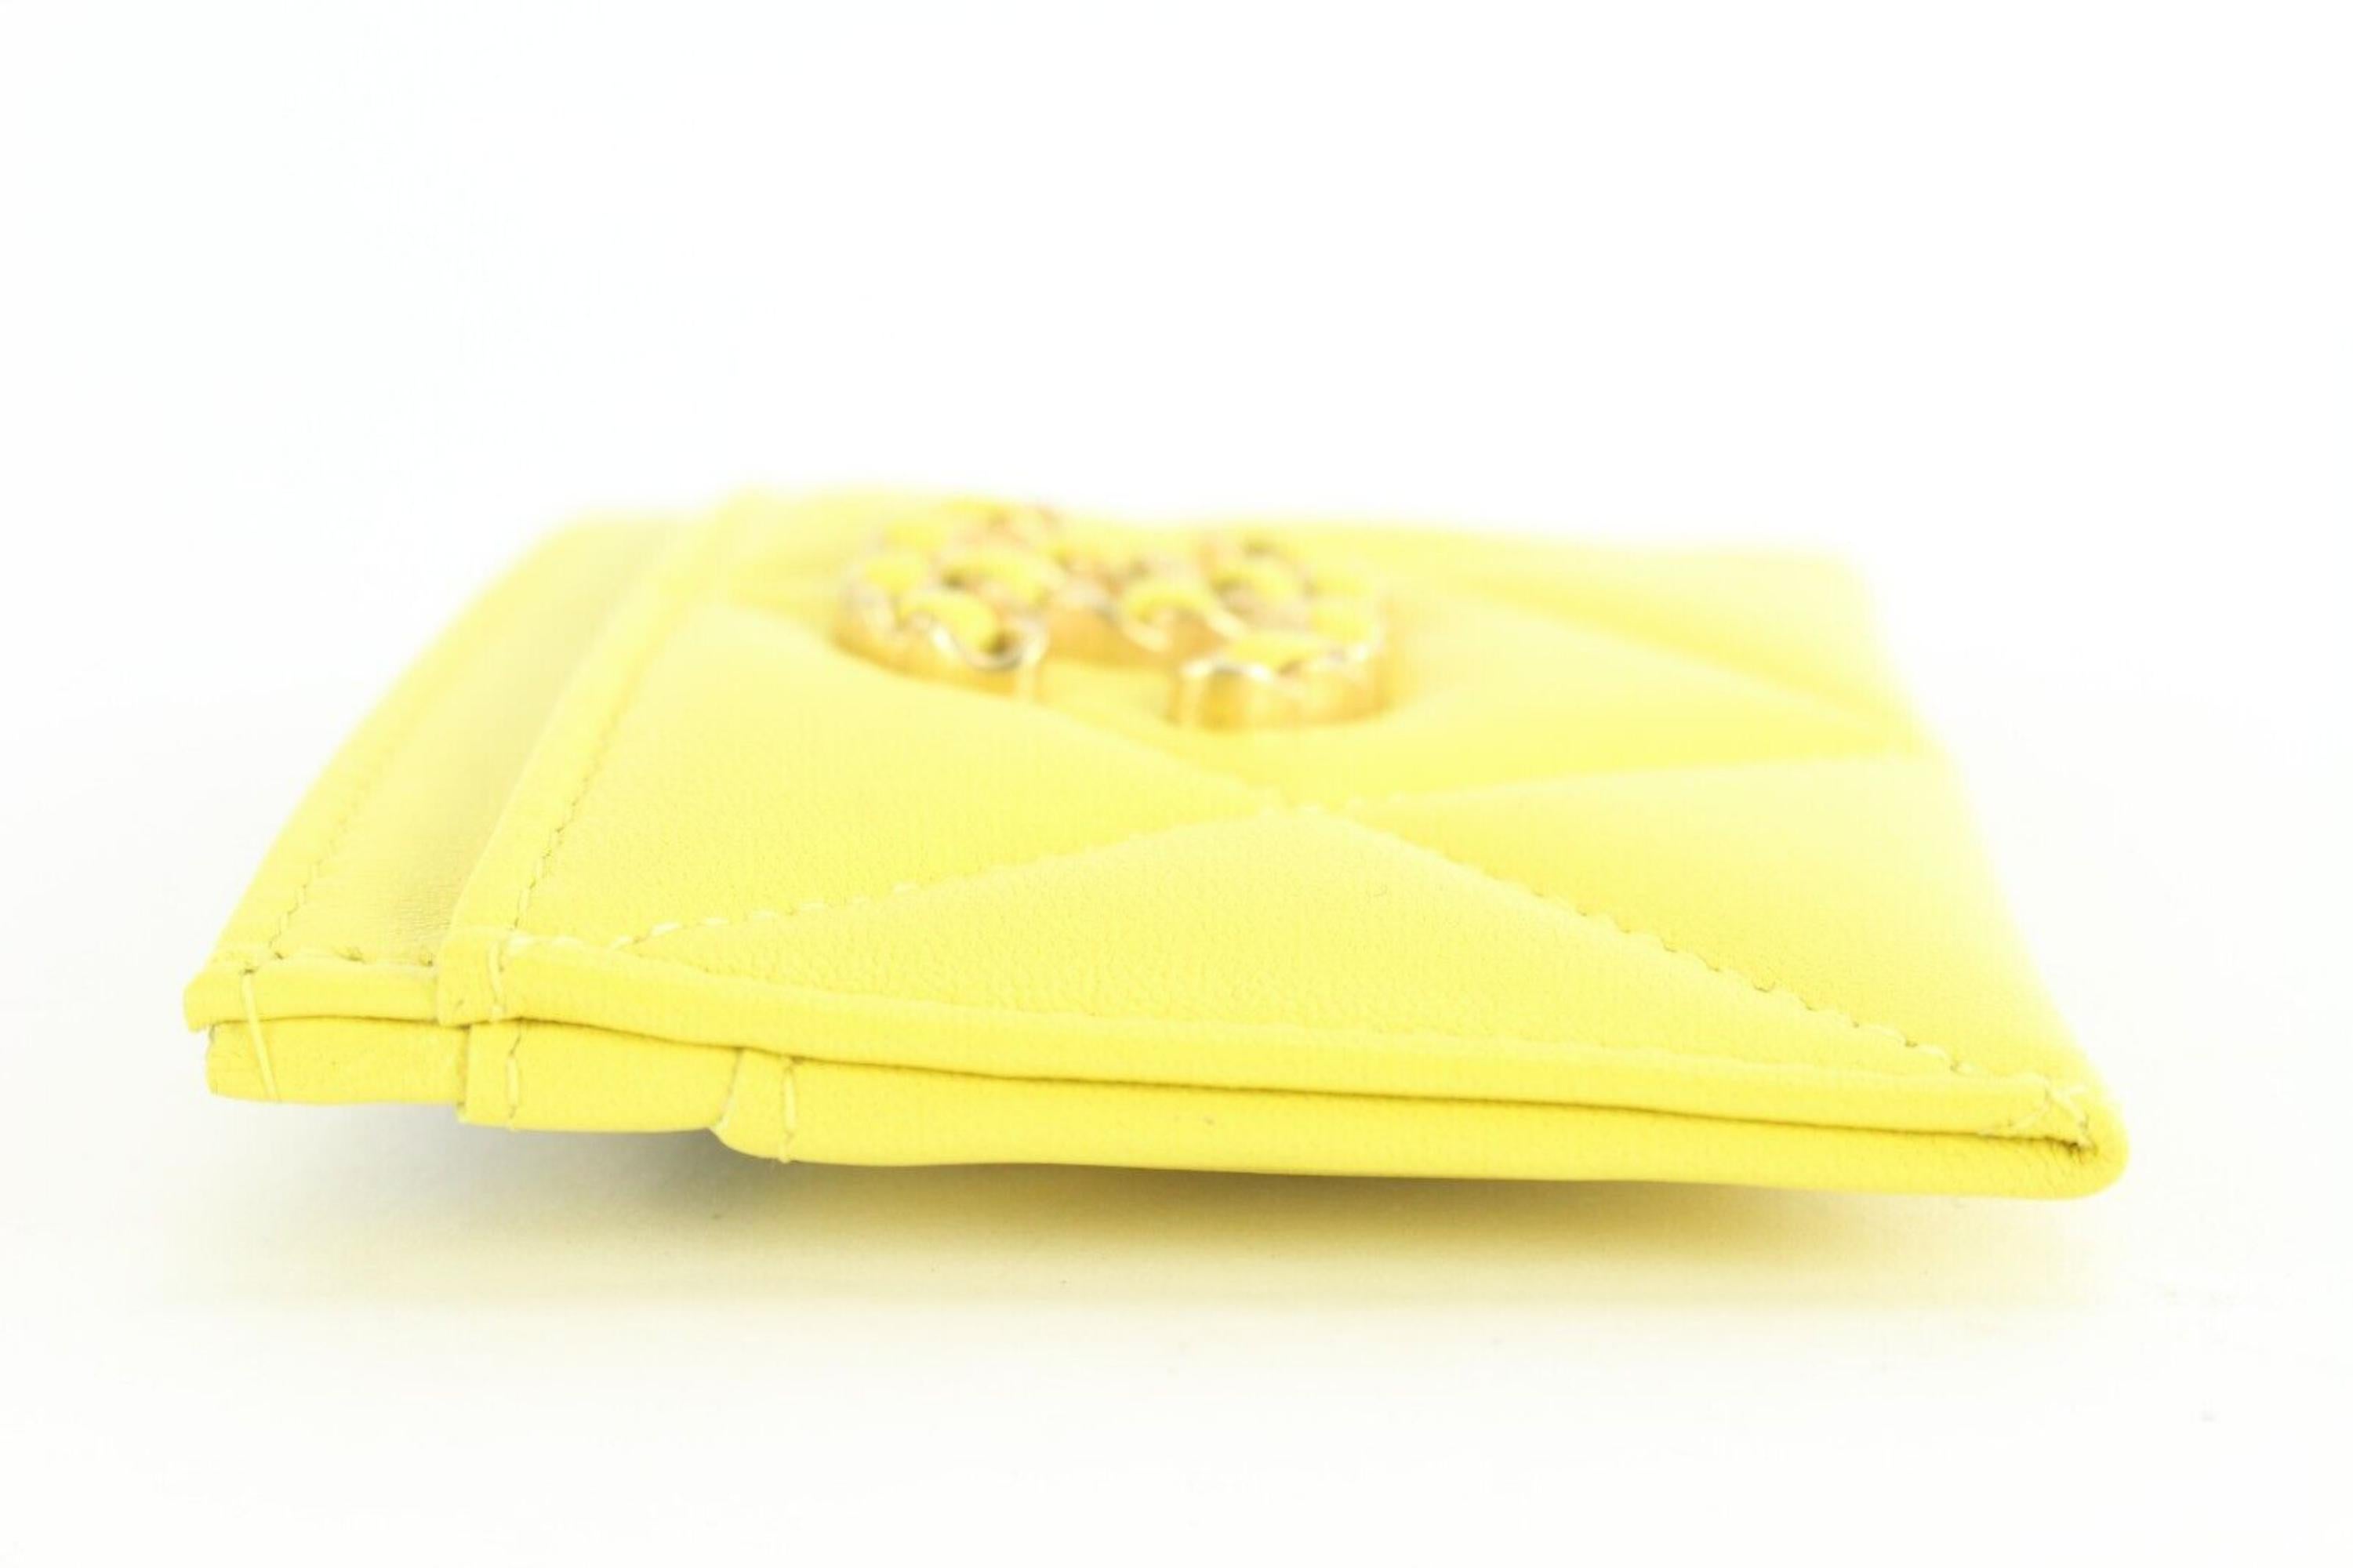 Chanel 2023 Rare Bright Yellow Leather 19 Card Holder 3CJ1214 In New Condition For Sale In Dix hills, NY